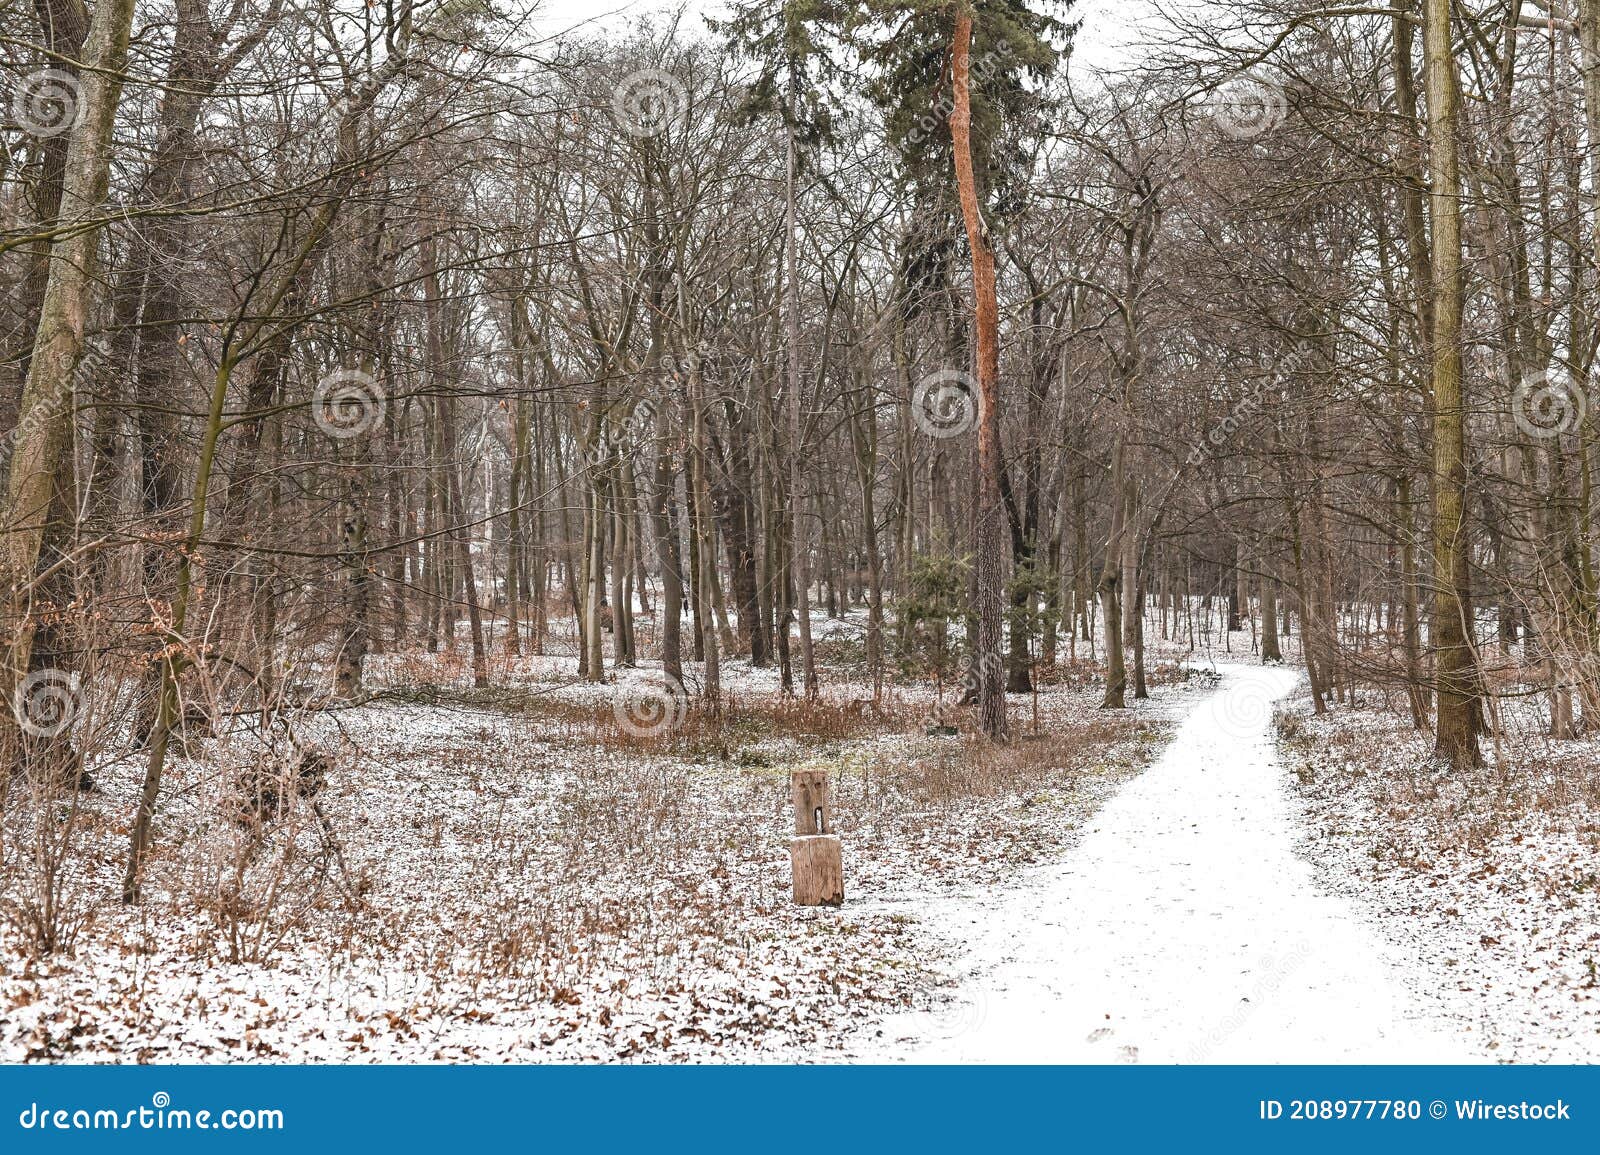 Snowy Pathway with Bare Trees in a Forest during Winter Stock Photo ...